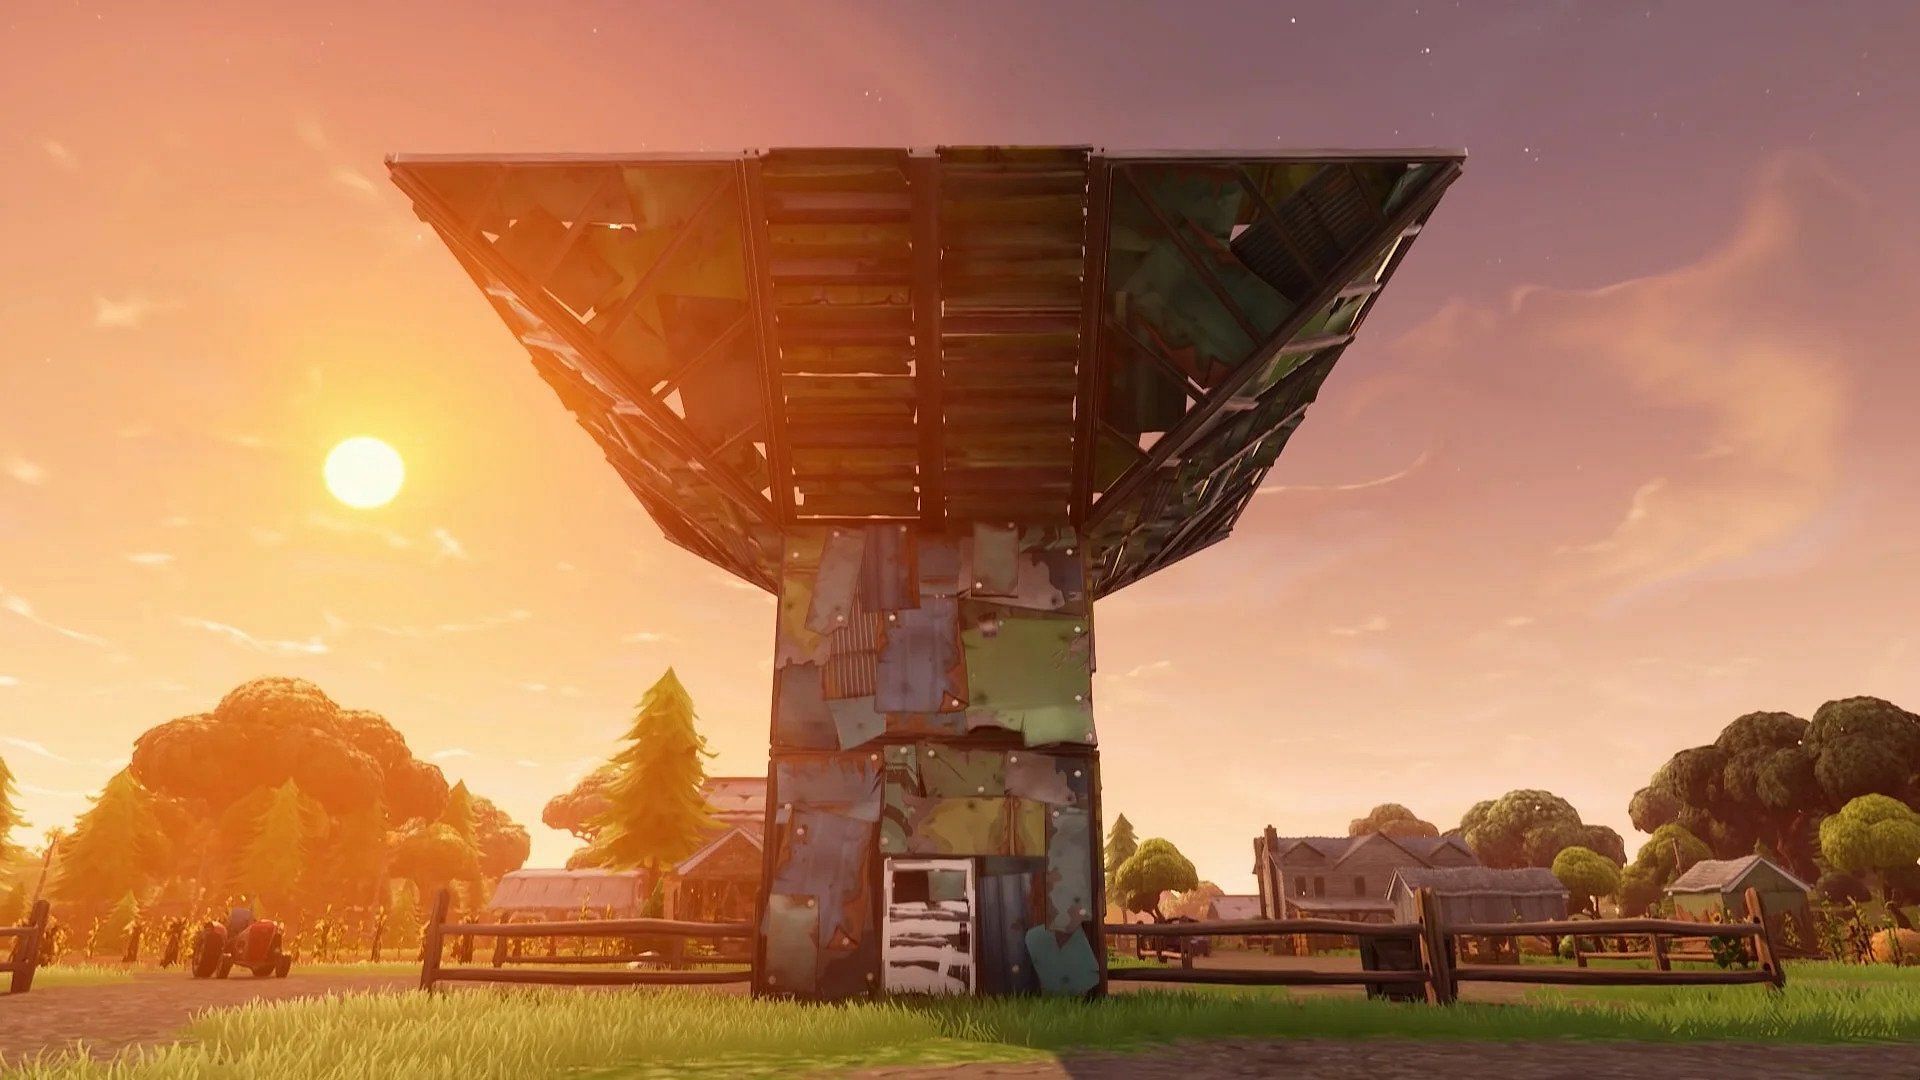 The latest update has unvaulted the Port-a-Fort in Fortnite (Image via Epic Games)